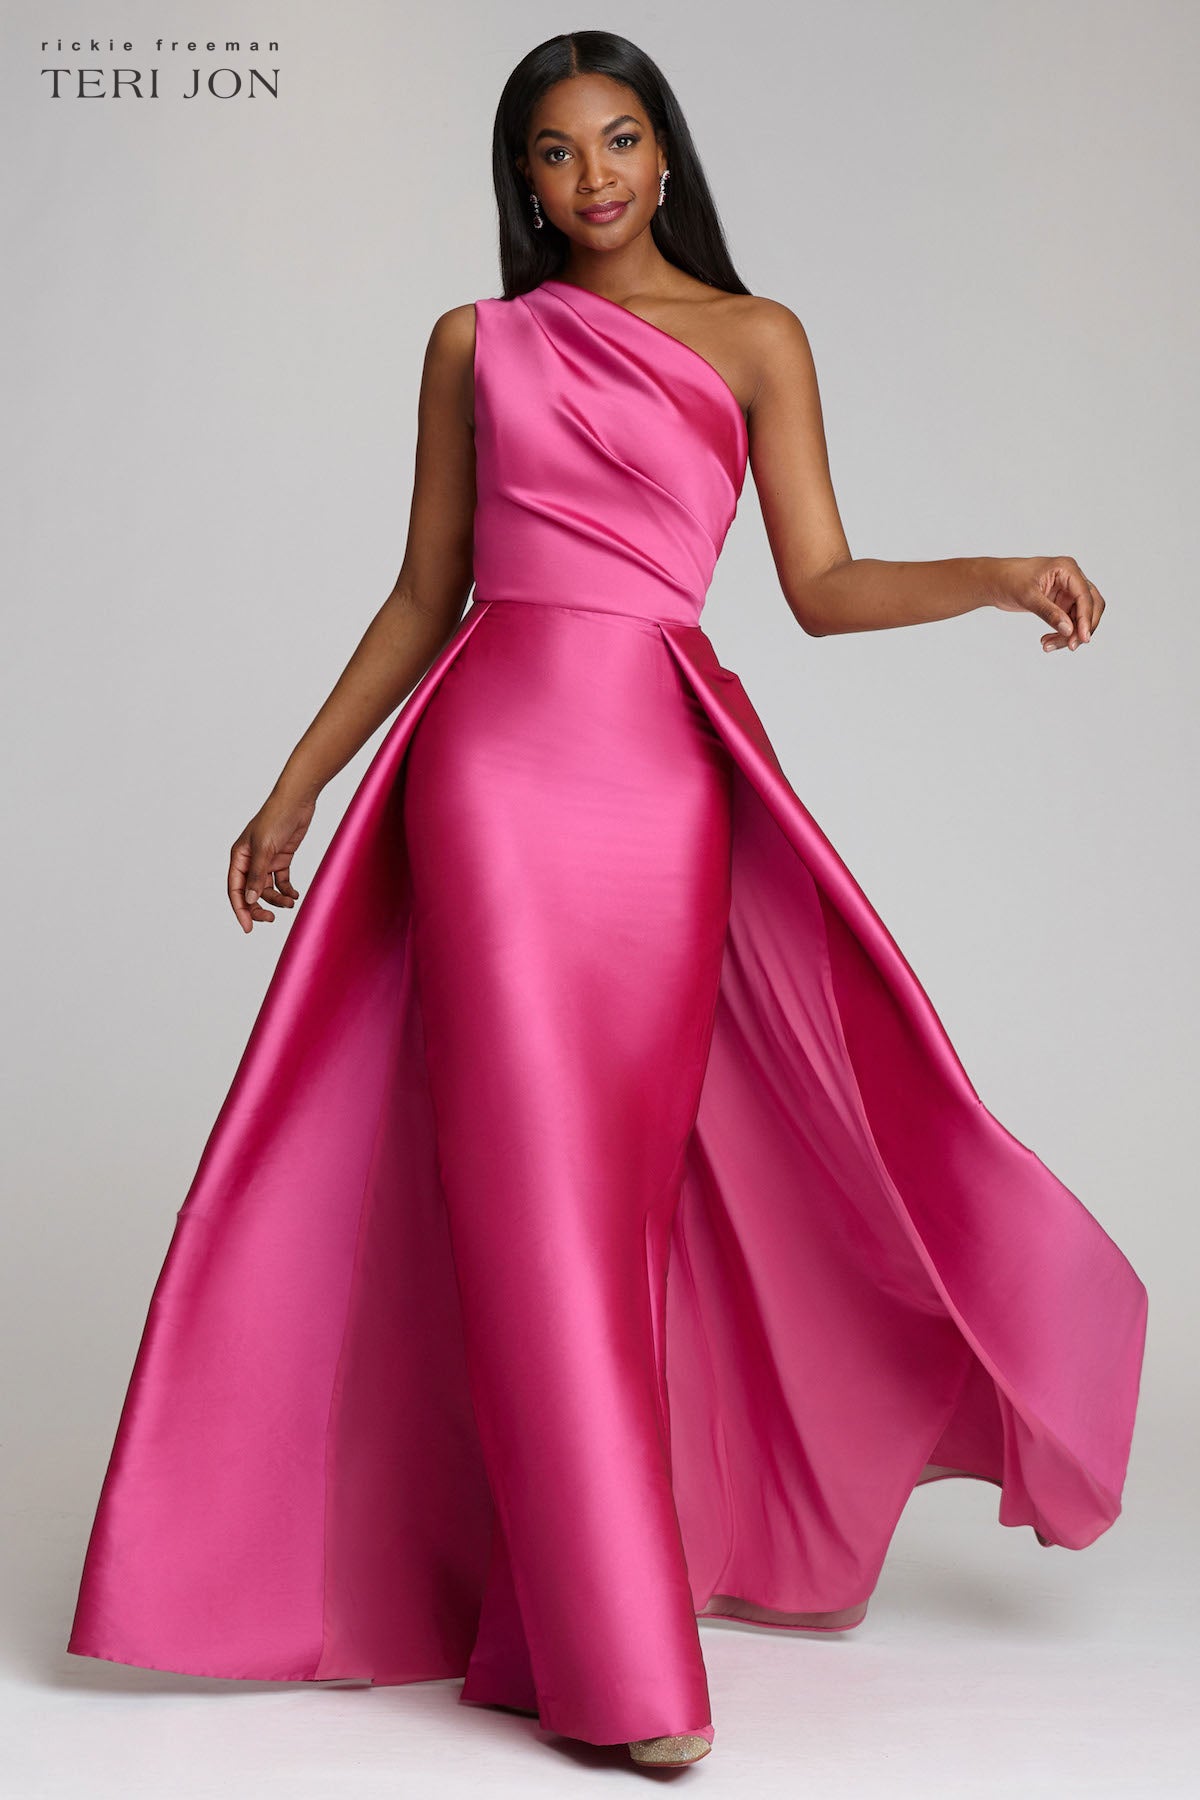 Modest Floral High Neck Pink Ball Gowns with Long Sleeves FD2311 vinio –  Viniodress